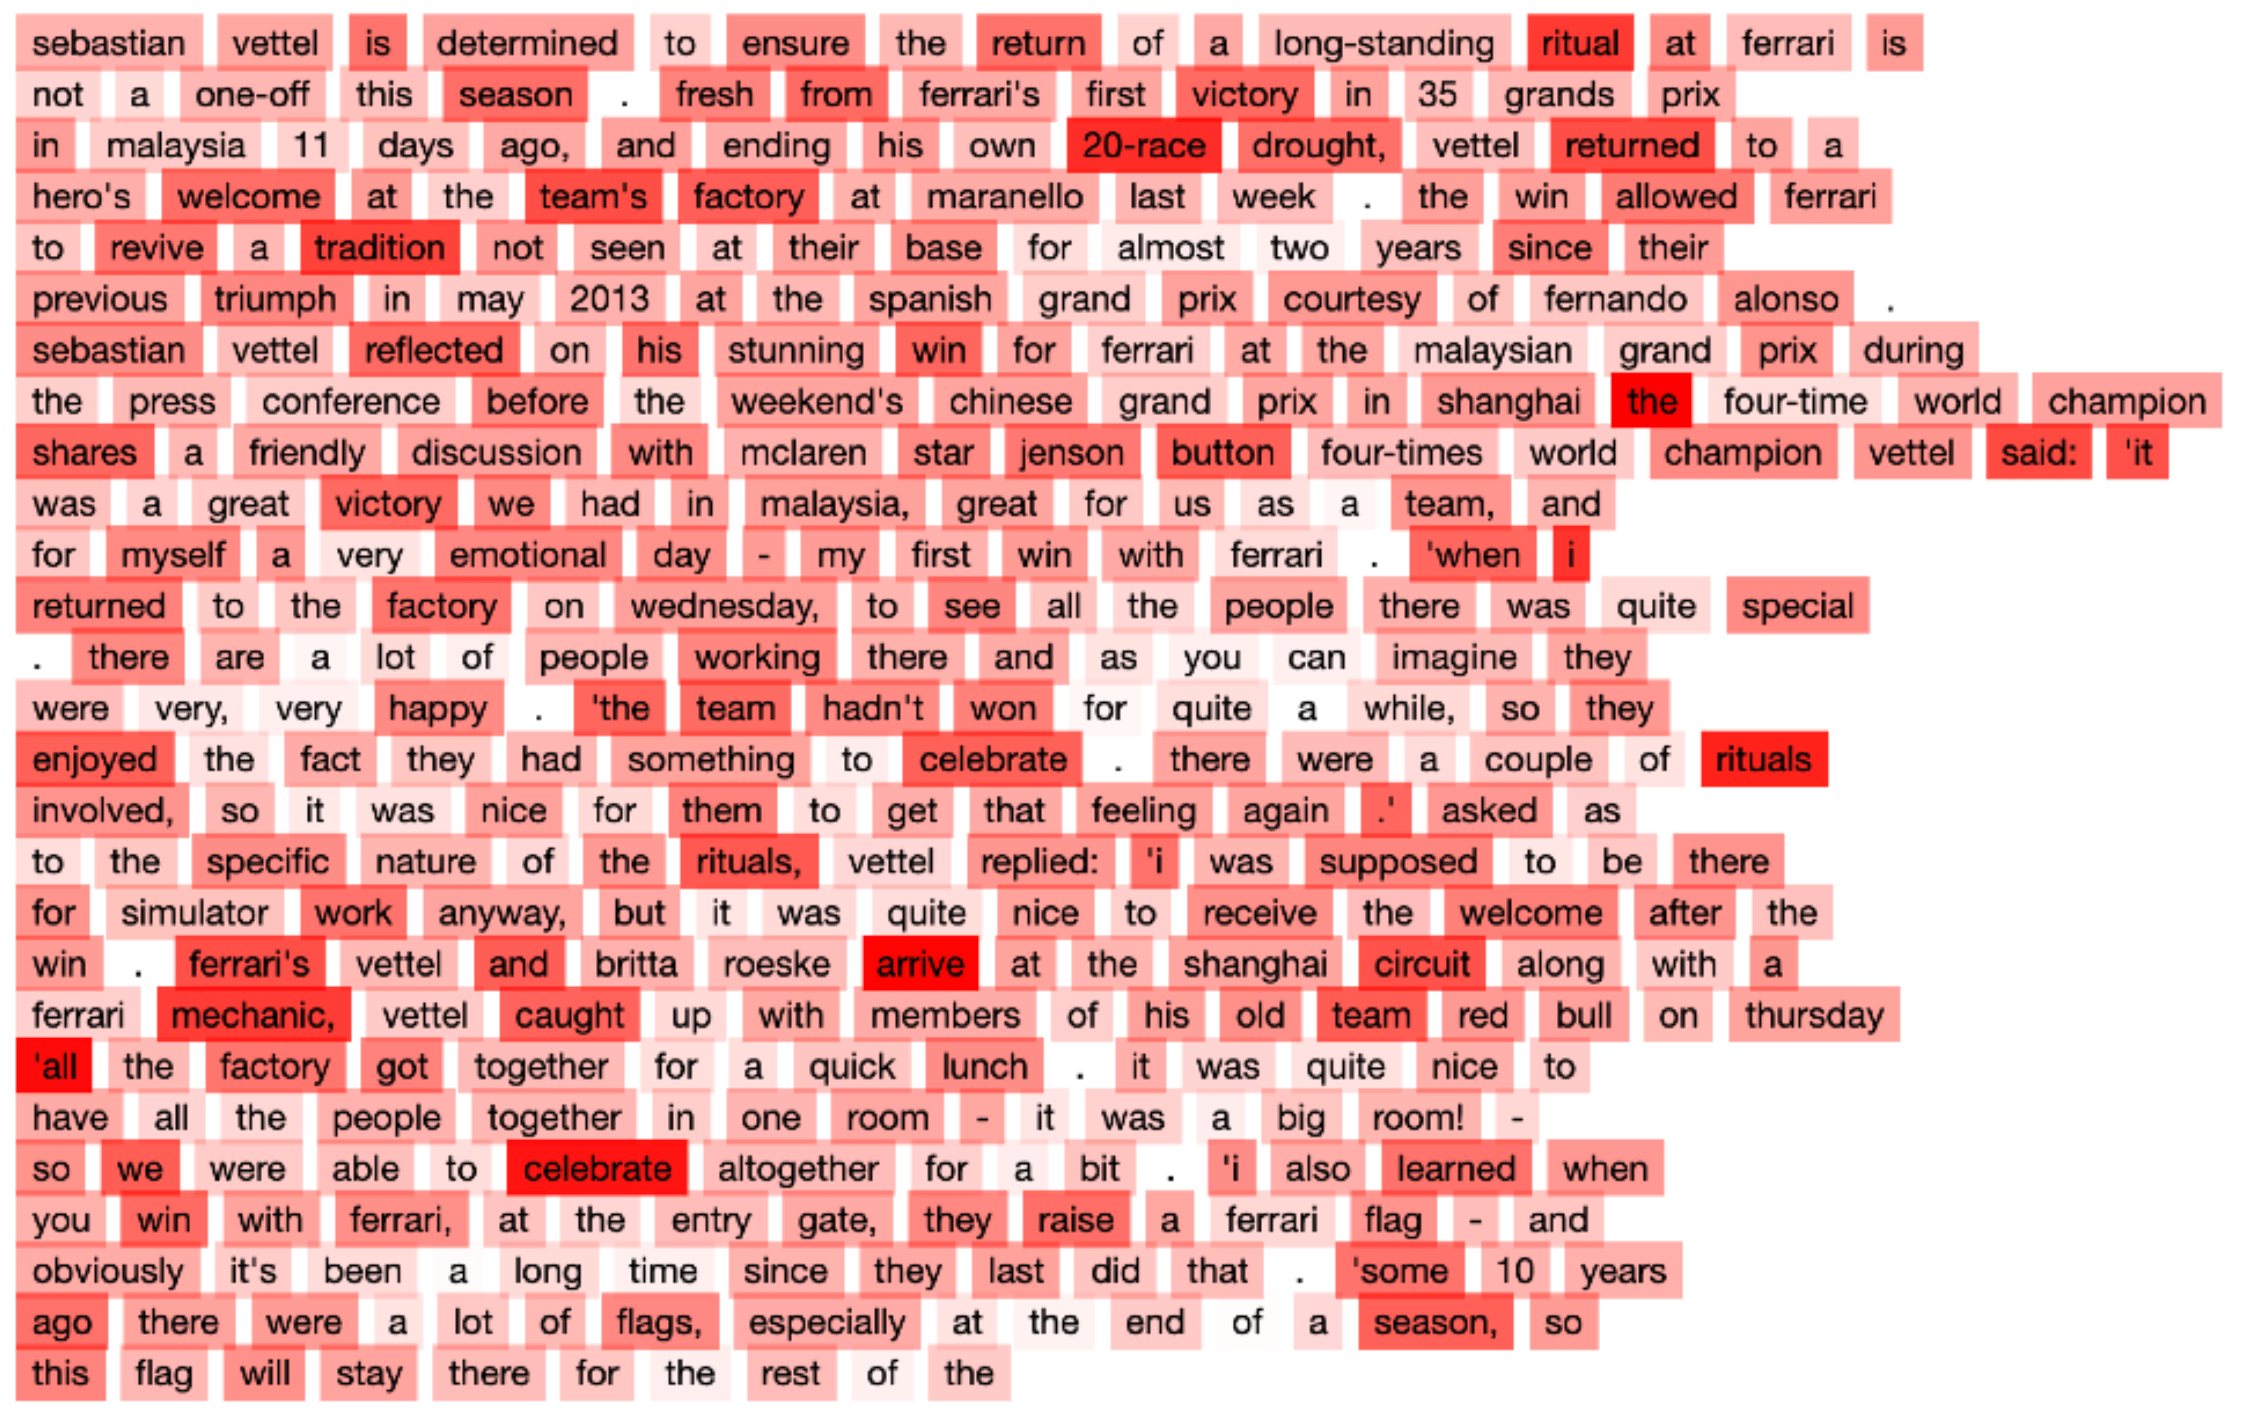 Attention Visualizer Package: Showcase Highest Scored Words Using RoBERTa Model